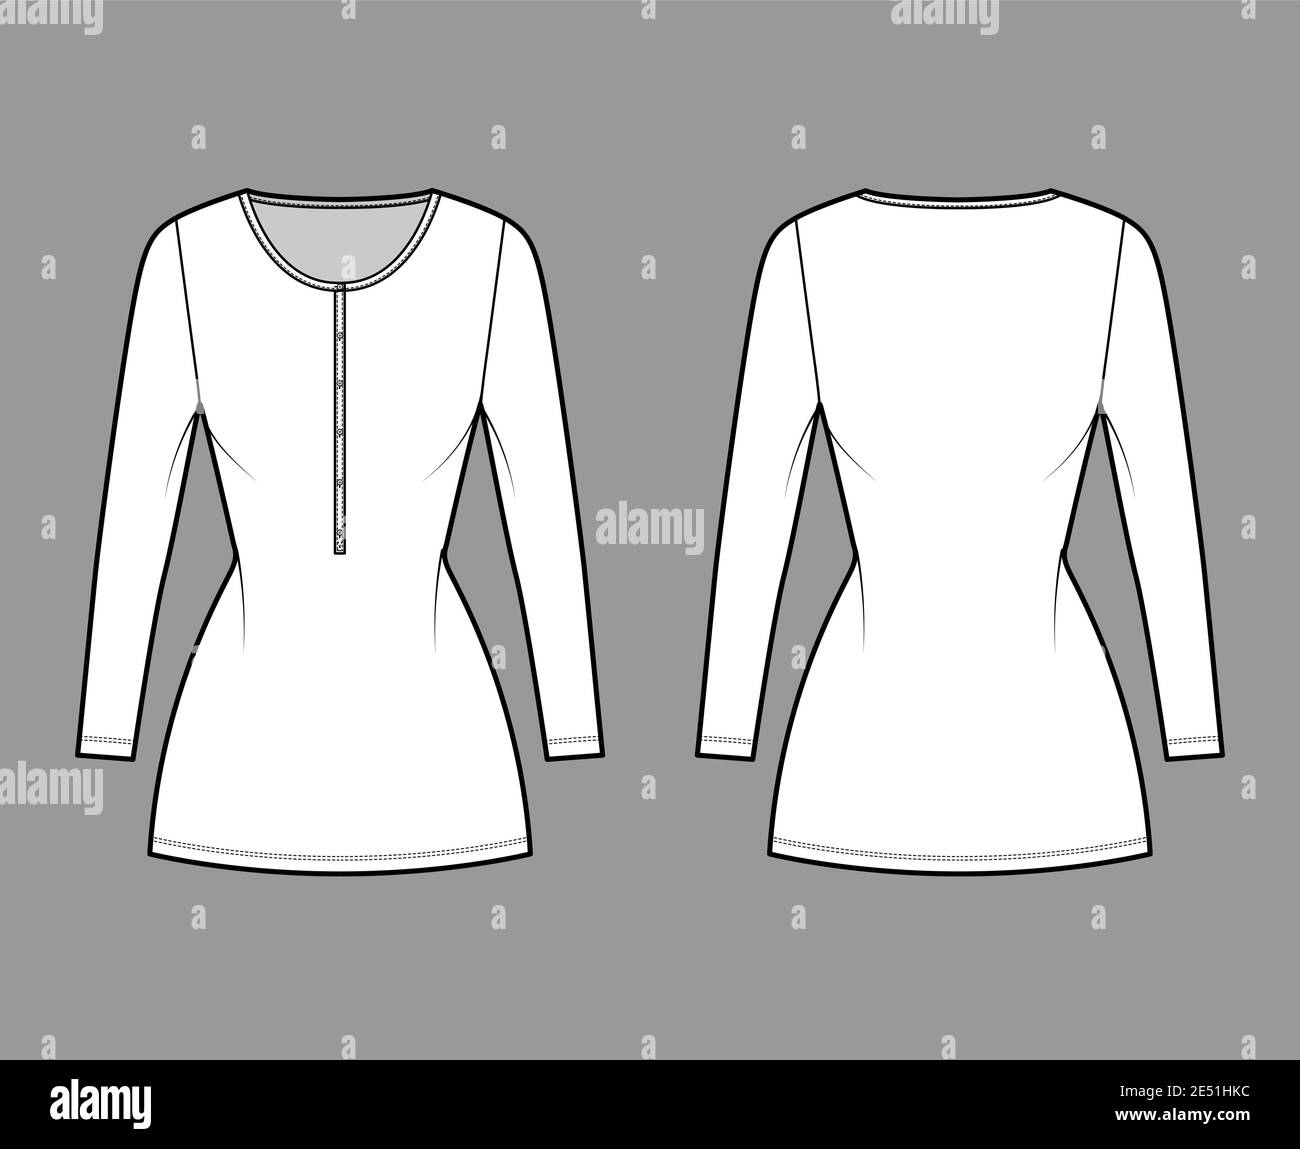 Shirt dress mini technical fashion illustration with henley neck, long sleeves, fitted body, Pencil fullness, stretch jersey. Flat apparel template front, back, white color. Women, men, CAD mockup Stock Vector